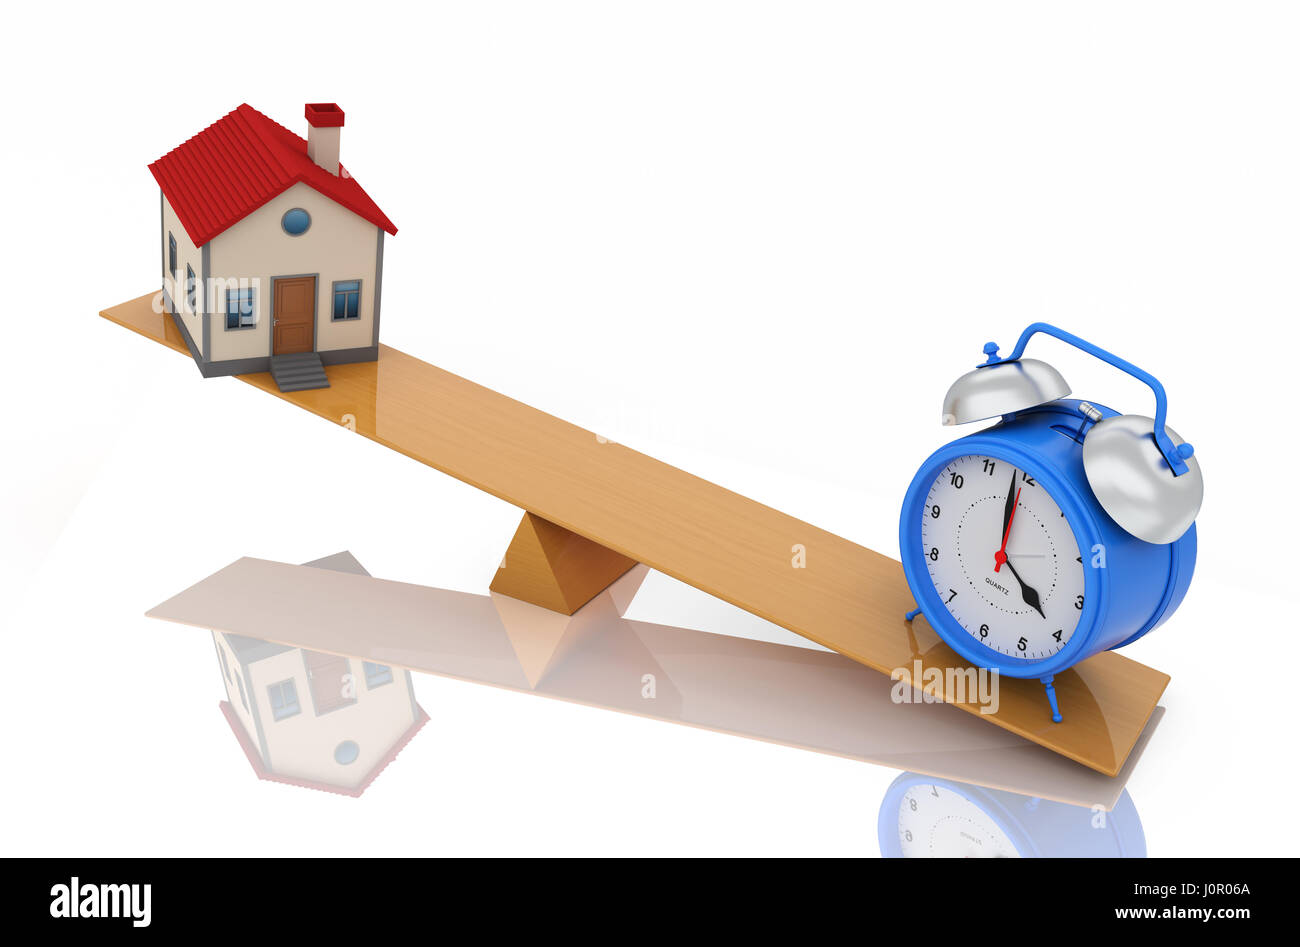 Alarm clock with House Model - 3D Rendering Image Stock Photo